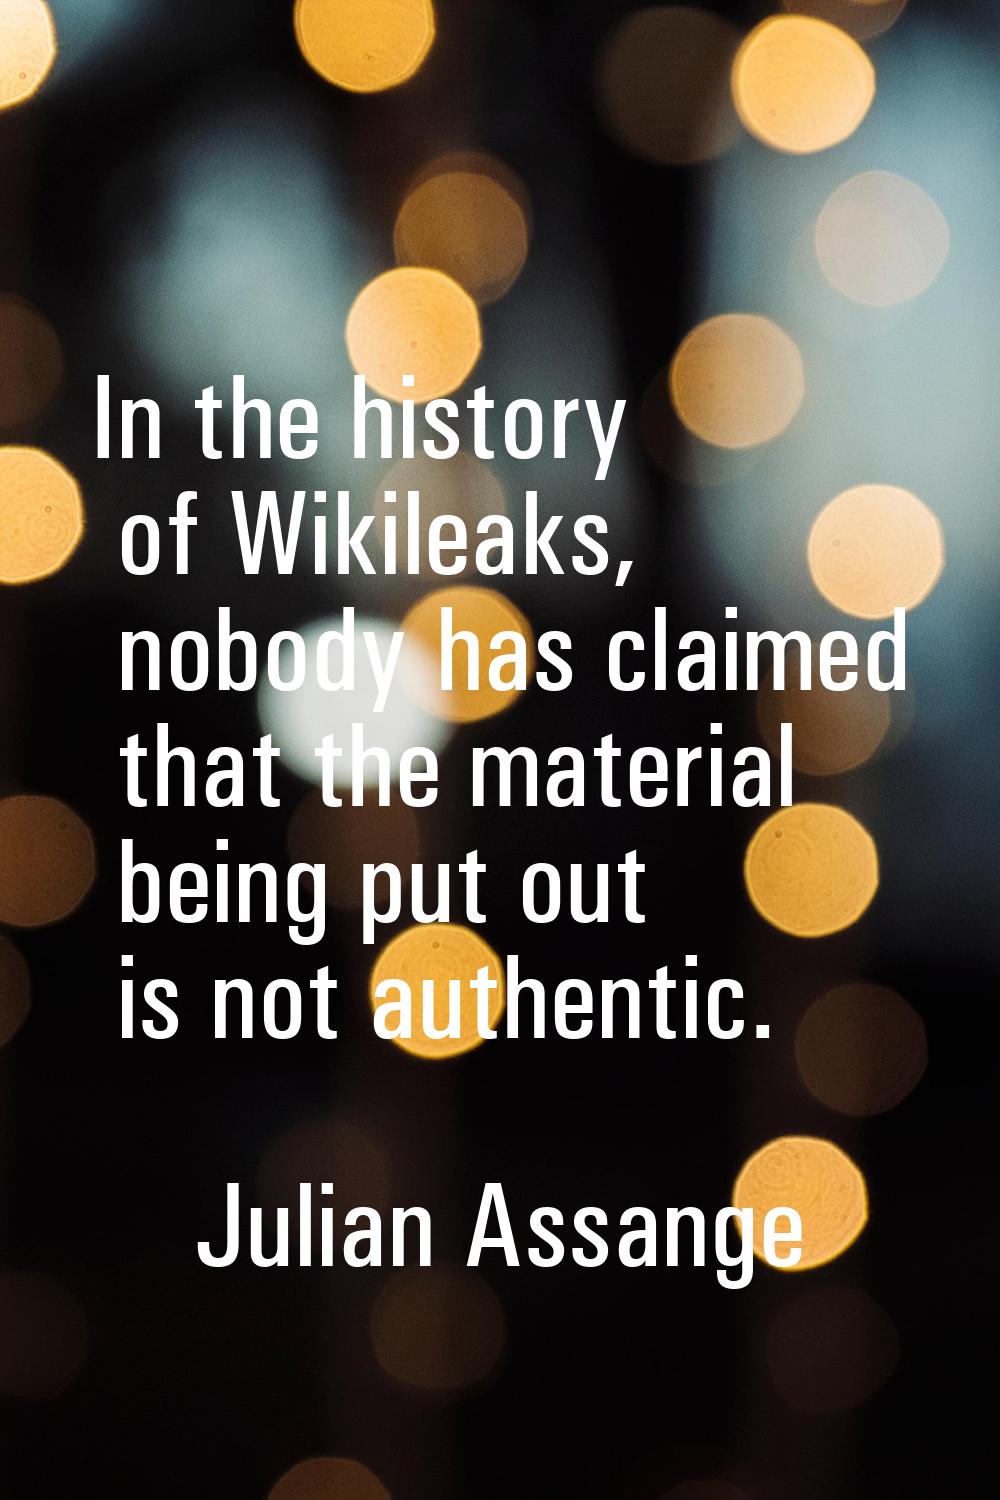 In the history of Wikileaks, nobody has claimed that the material being put out is not authentic.